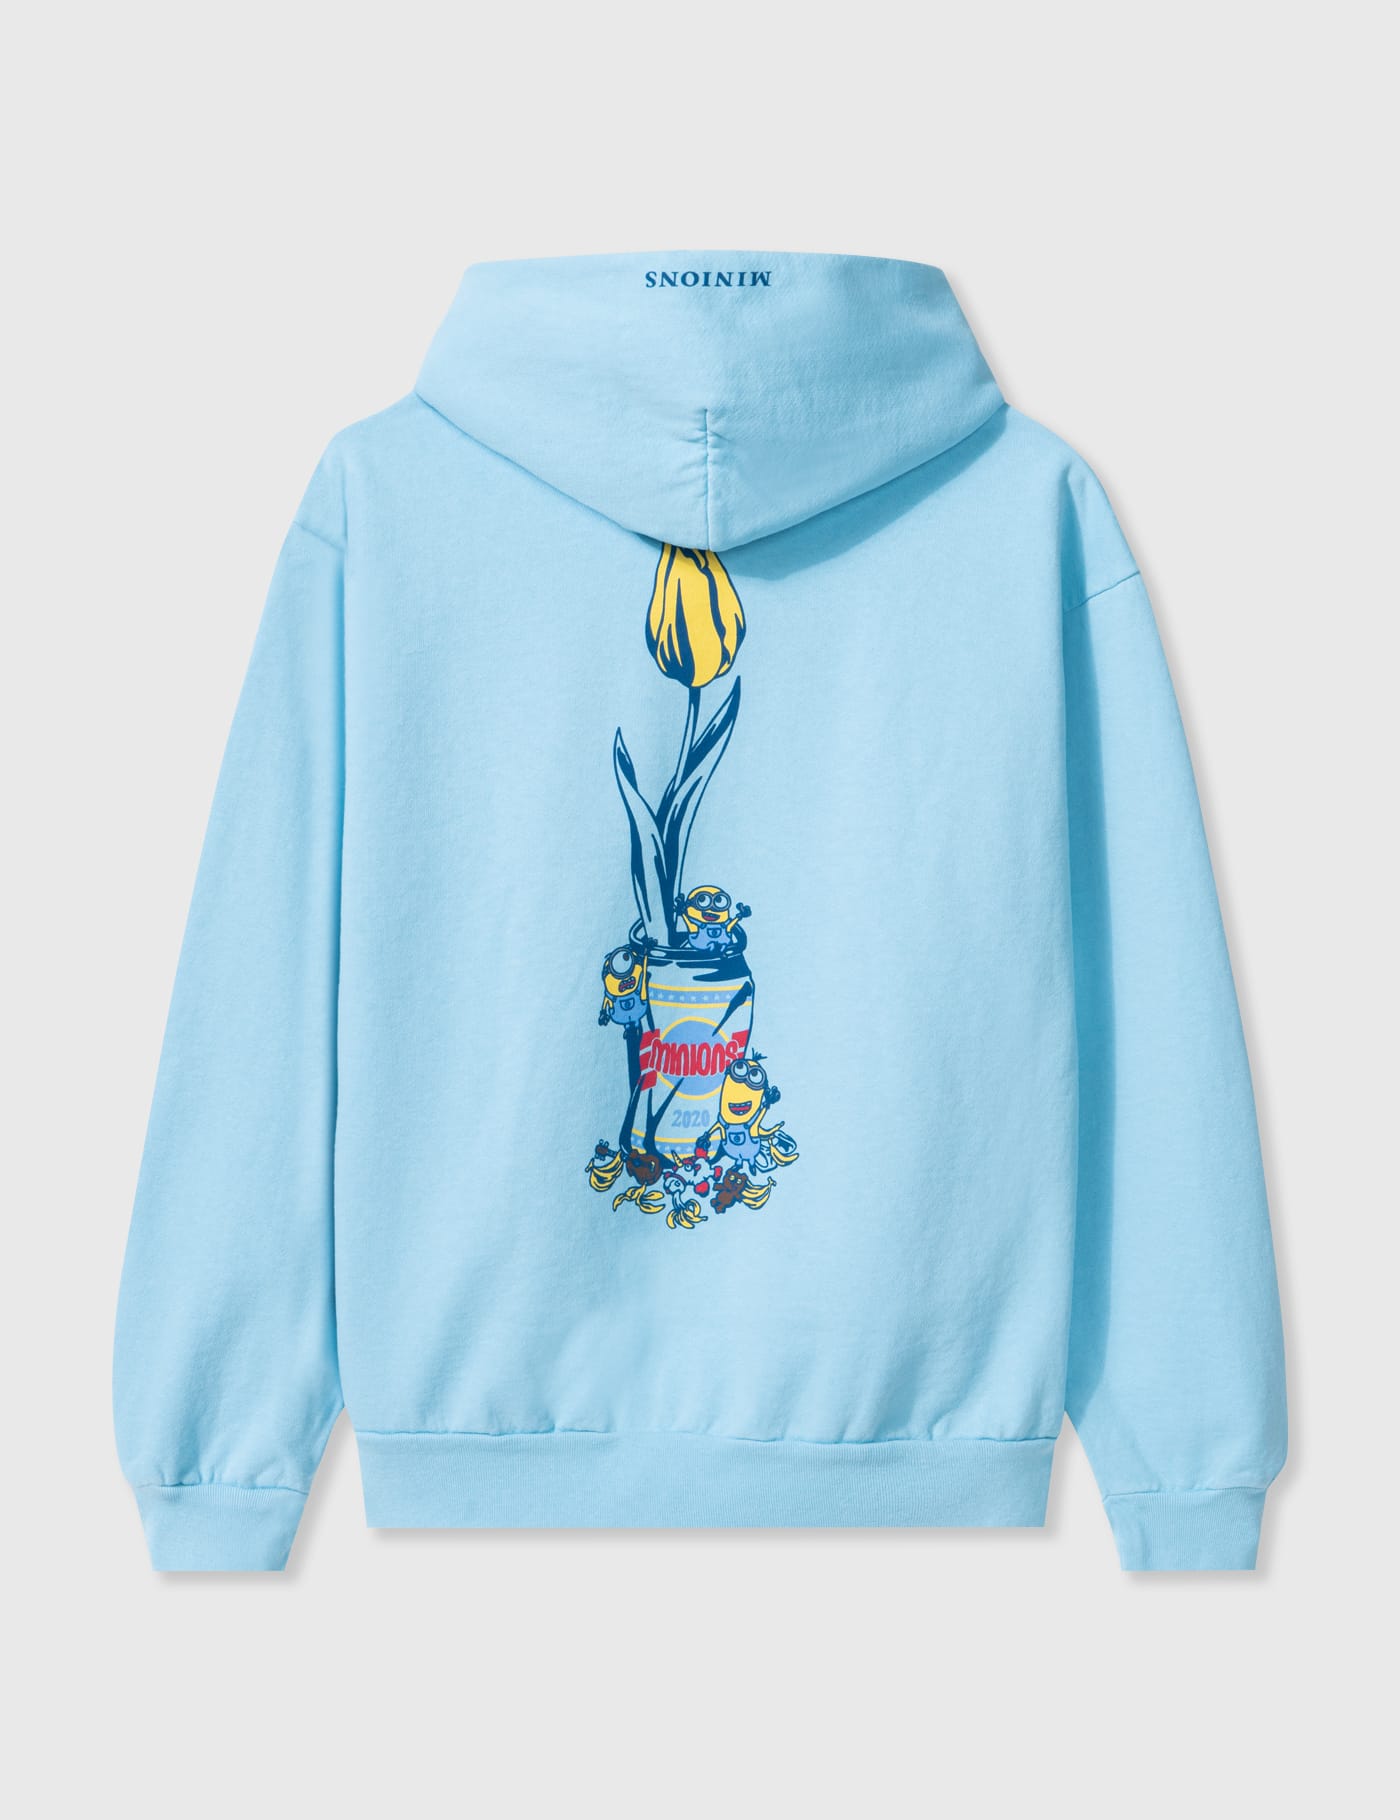 Verdy x Minions - Minions x Wasted Youth Hoodie | HBX - Globally 